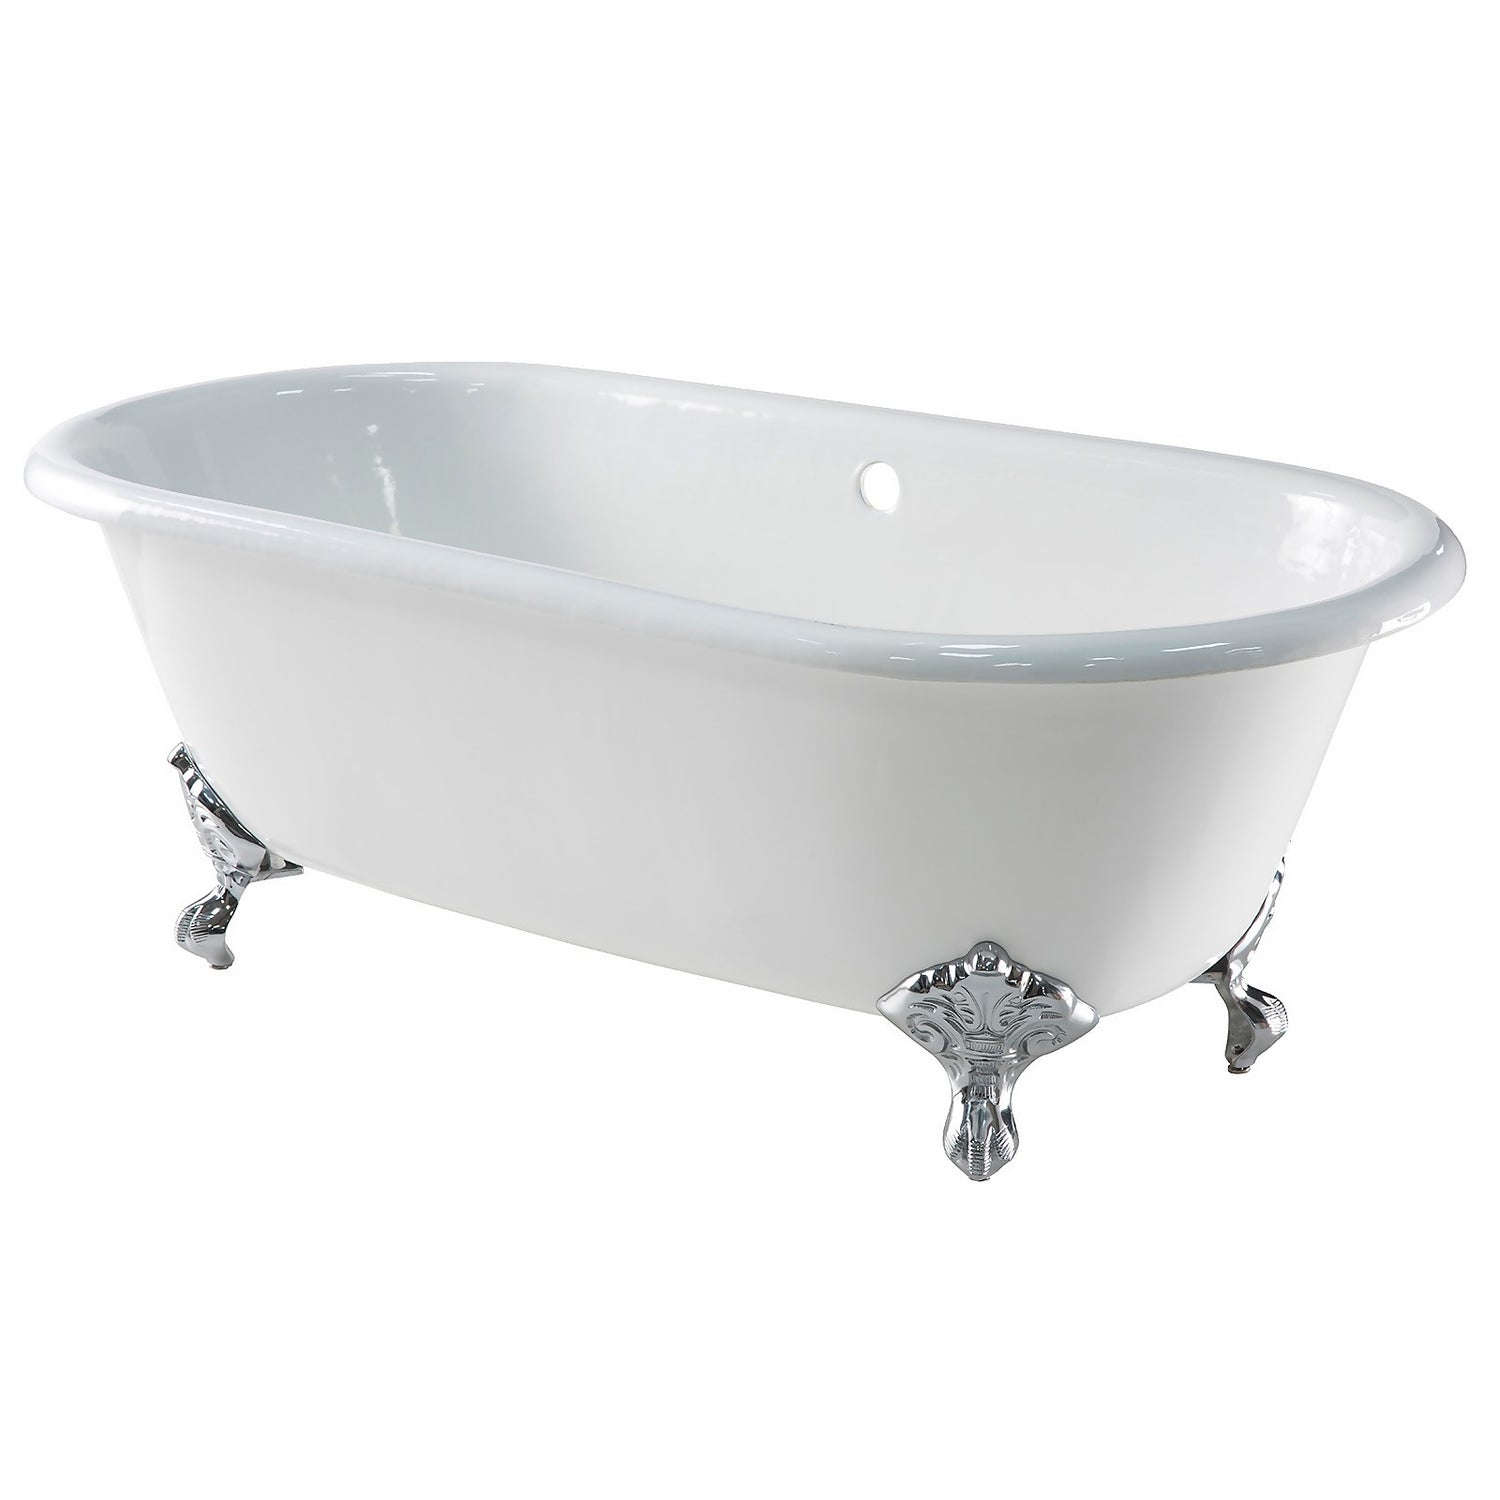 Moulin White Cast Iron Freestanding Bath with No Tap Holes - 1700 x 770mm